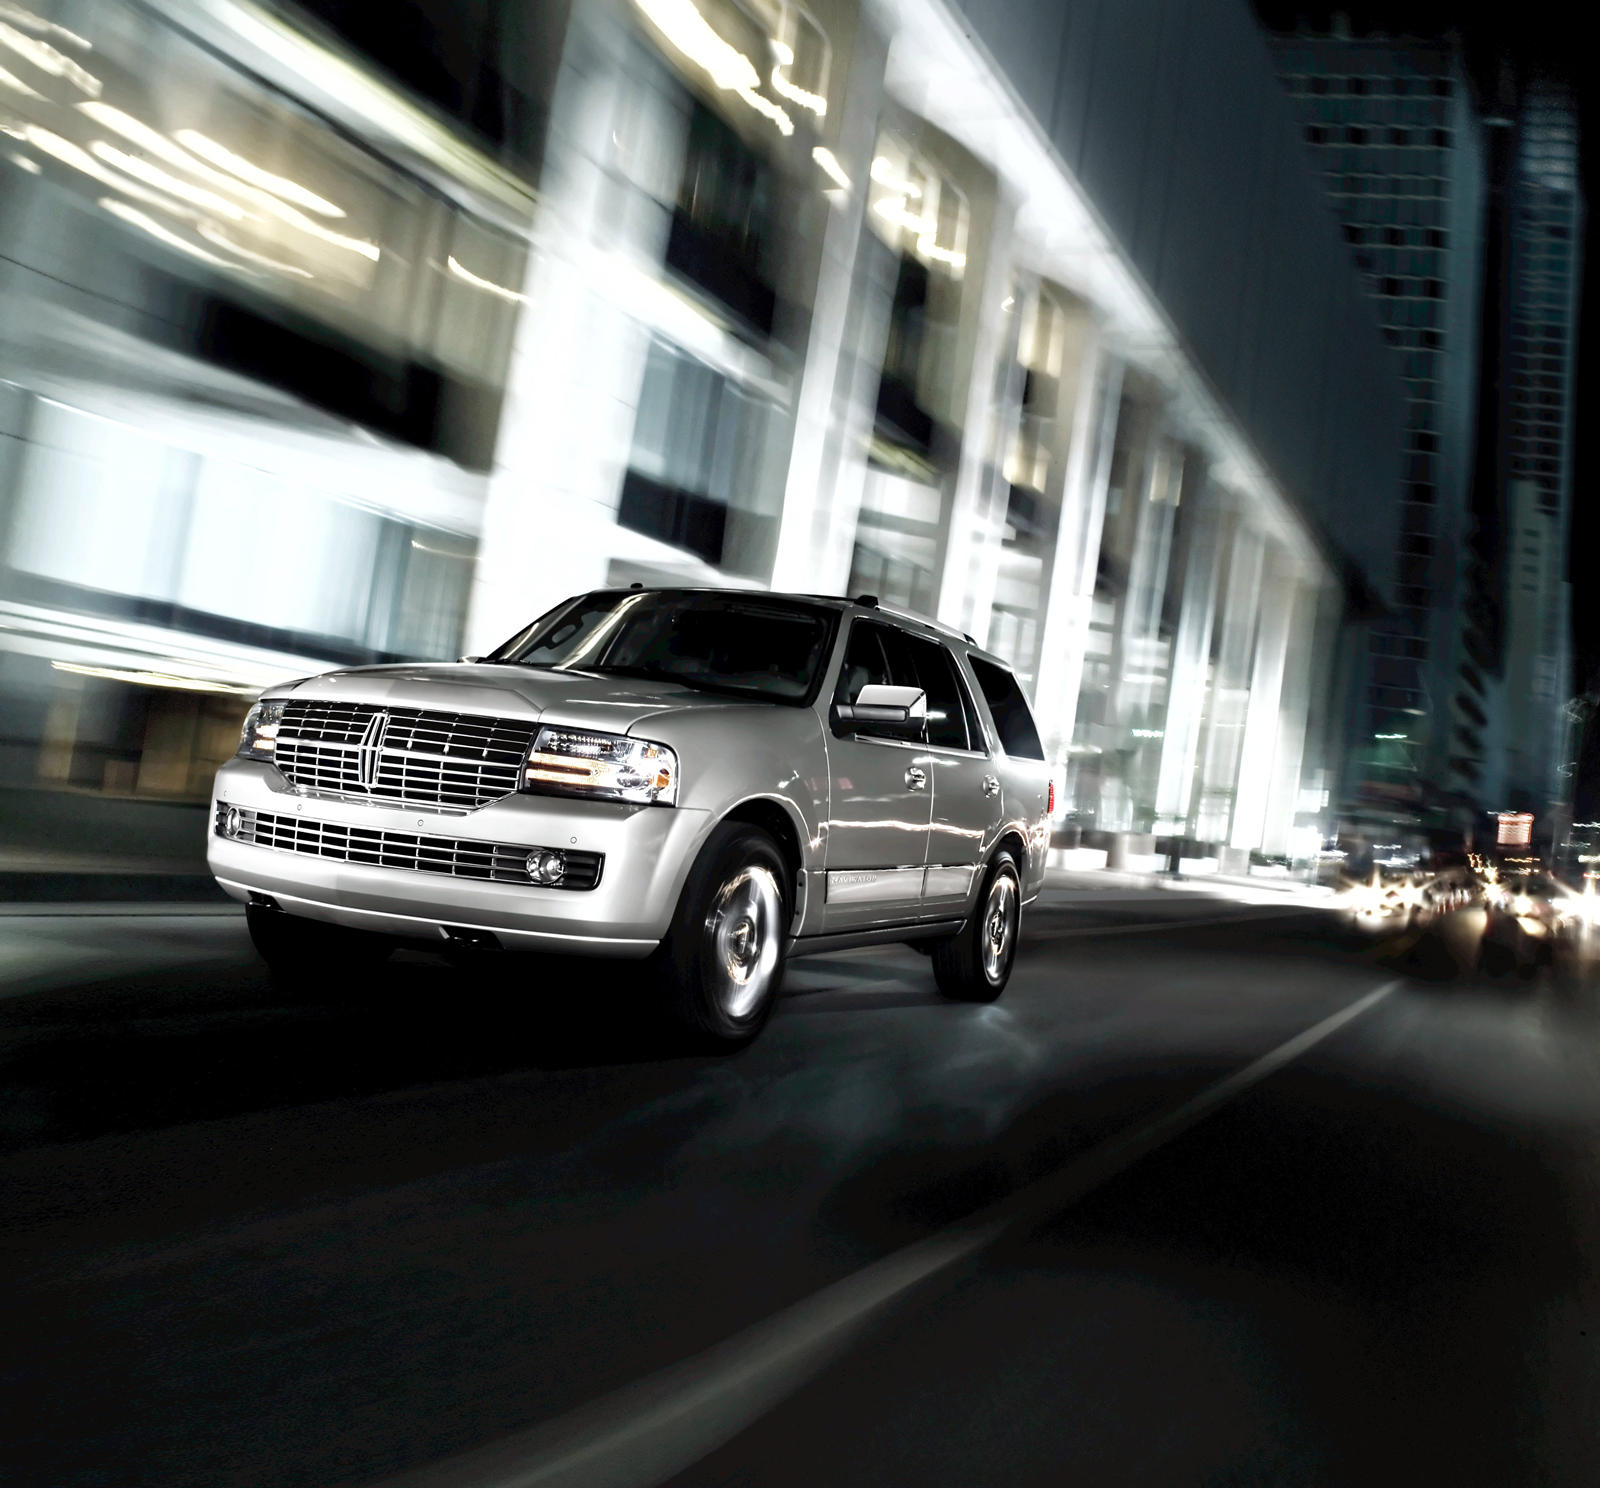 2011 Lincoln Navigator Front View Driving